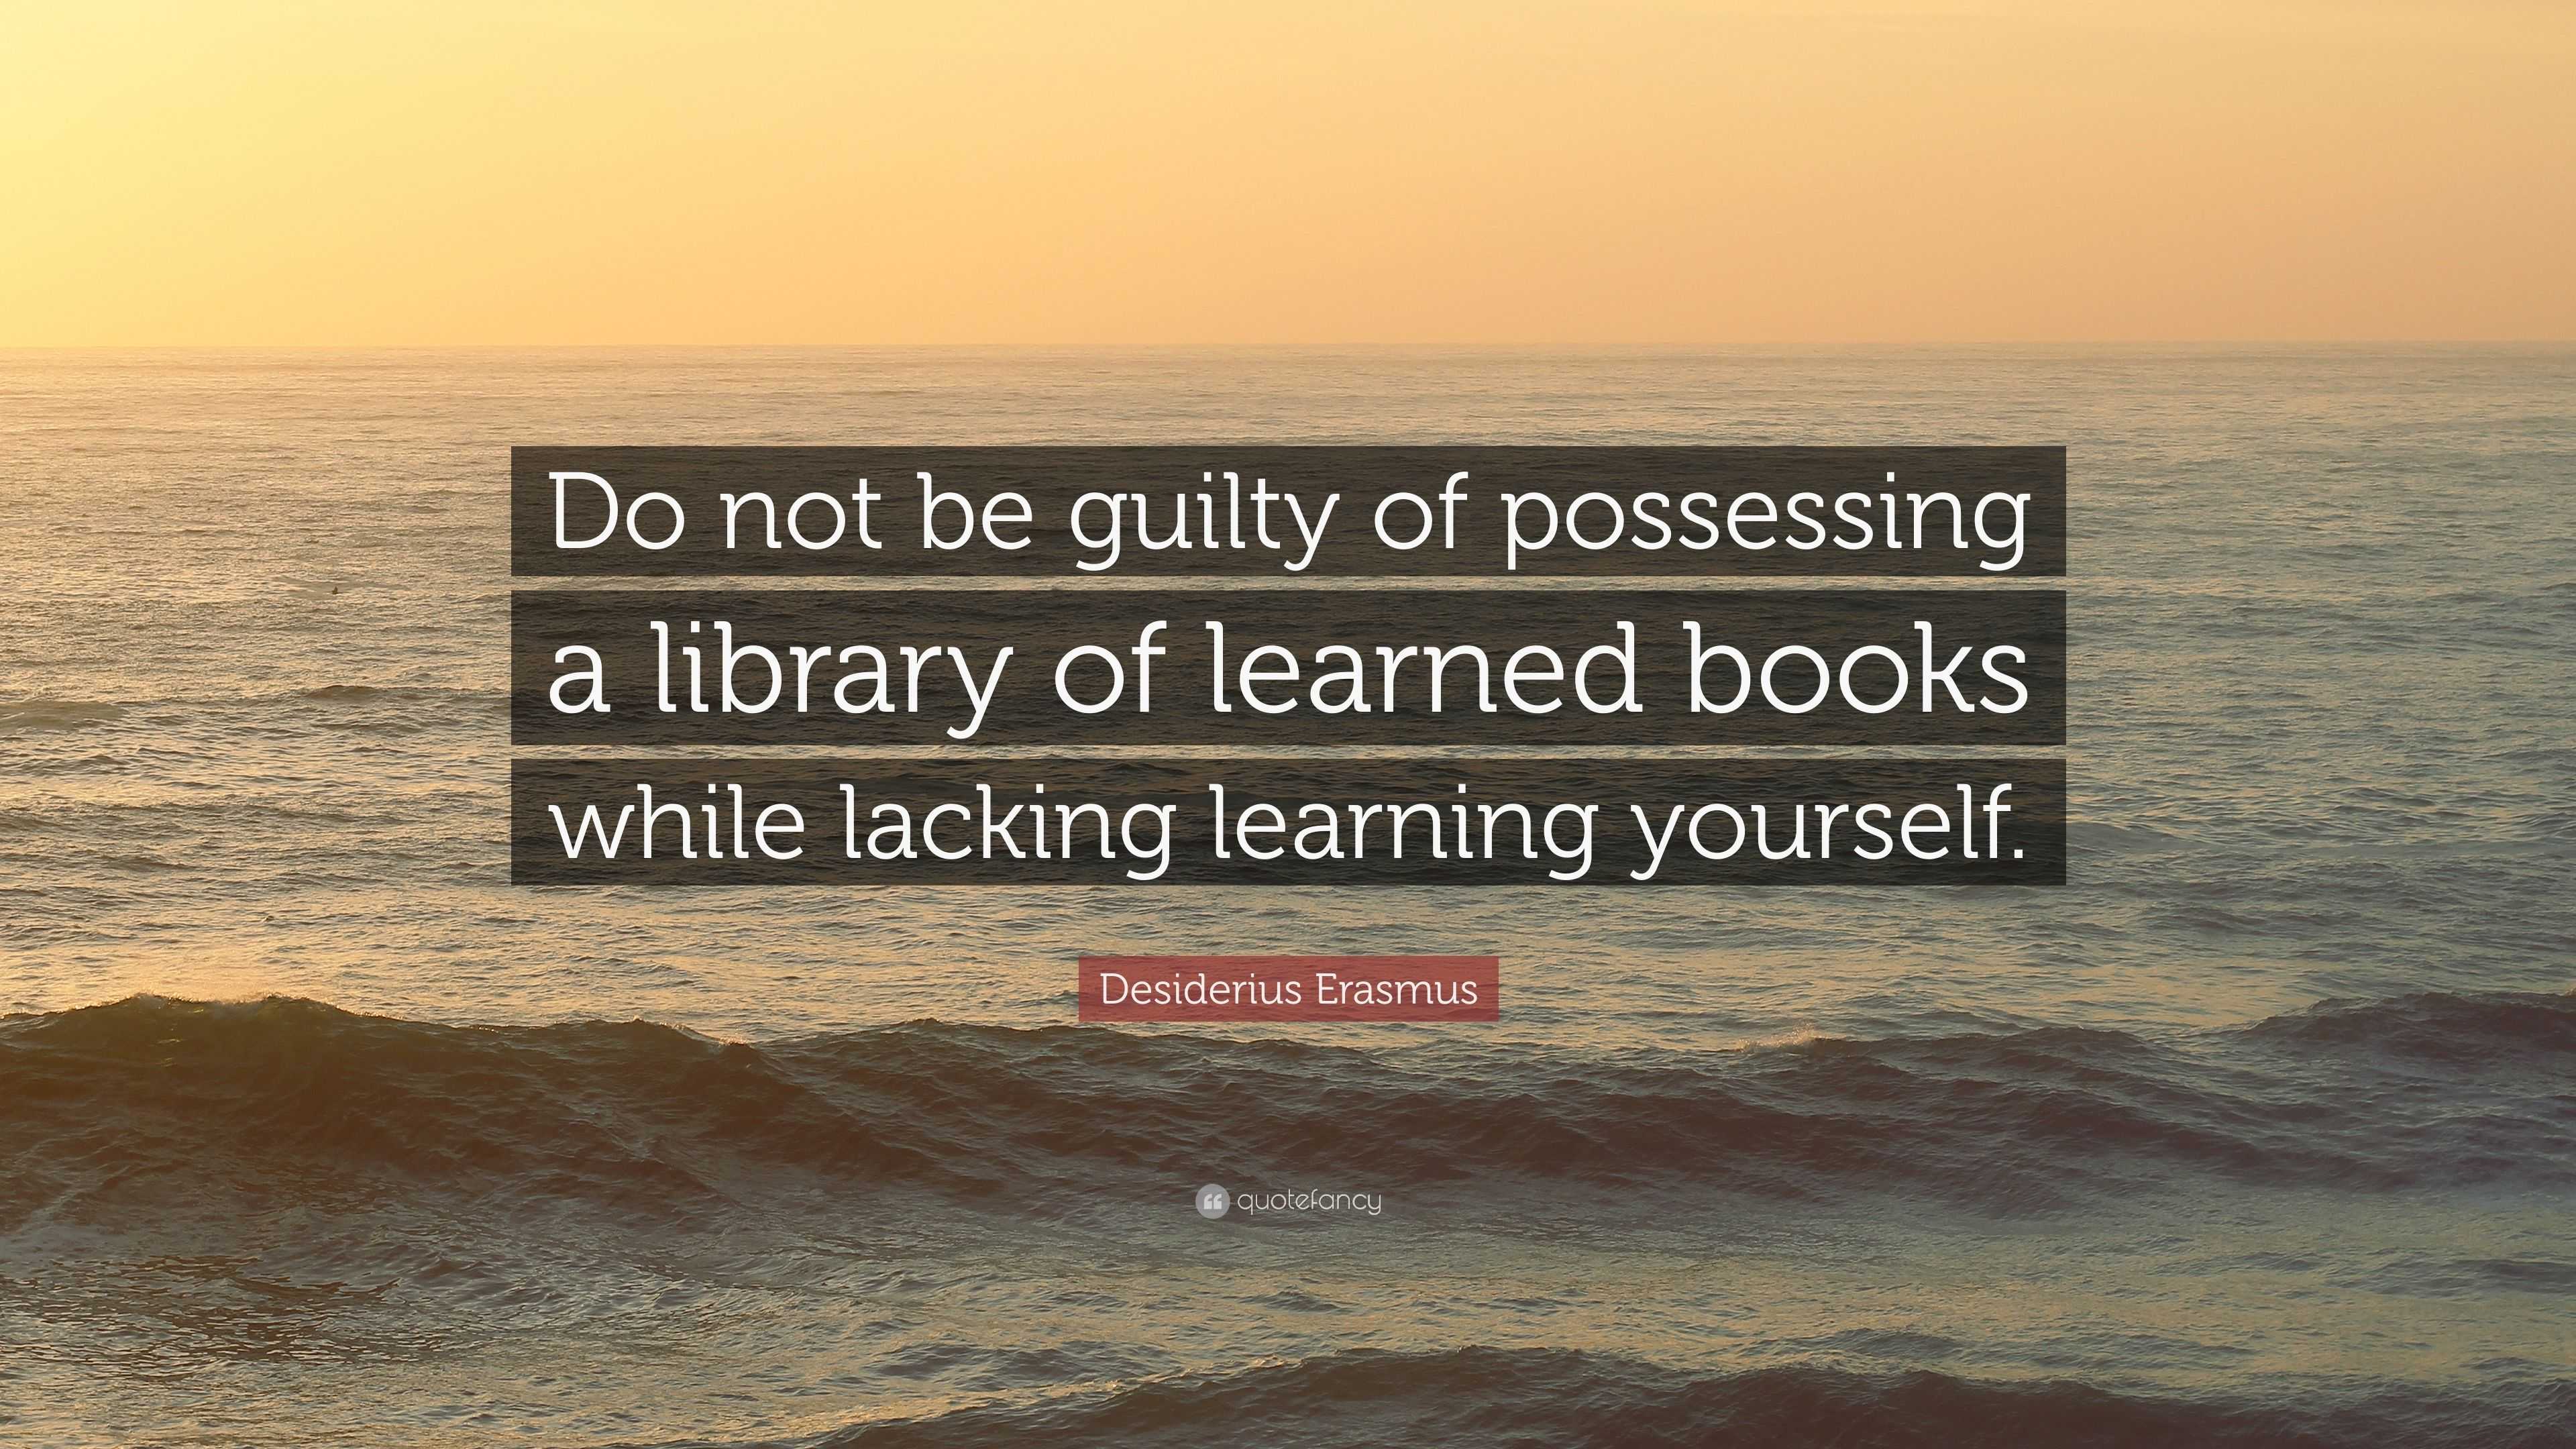 Desiderius Erasmus Quote: “Do not be guilty of possessing a library of ...